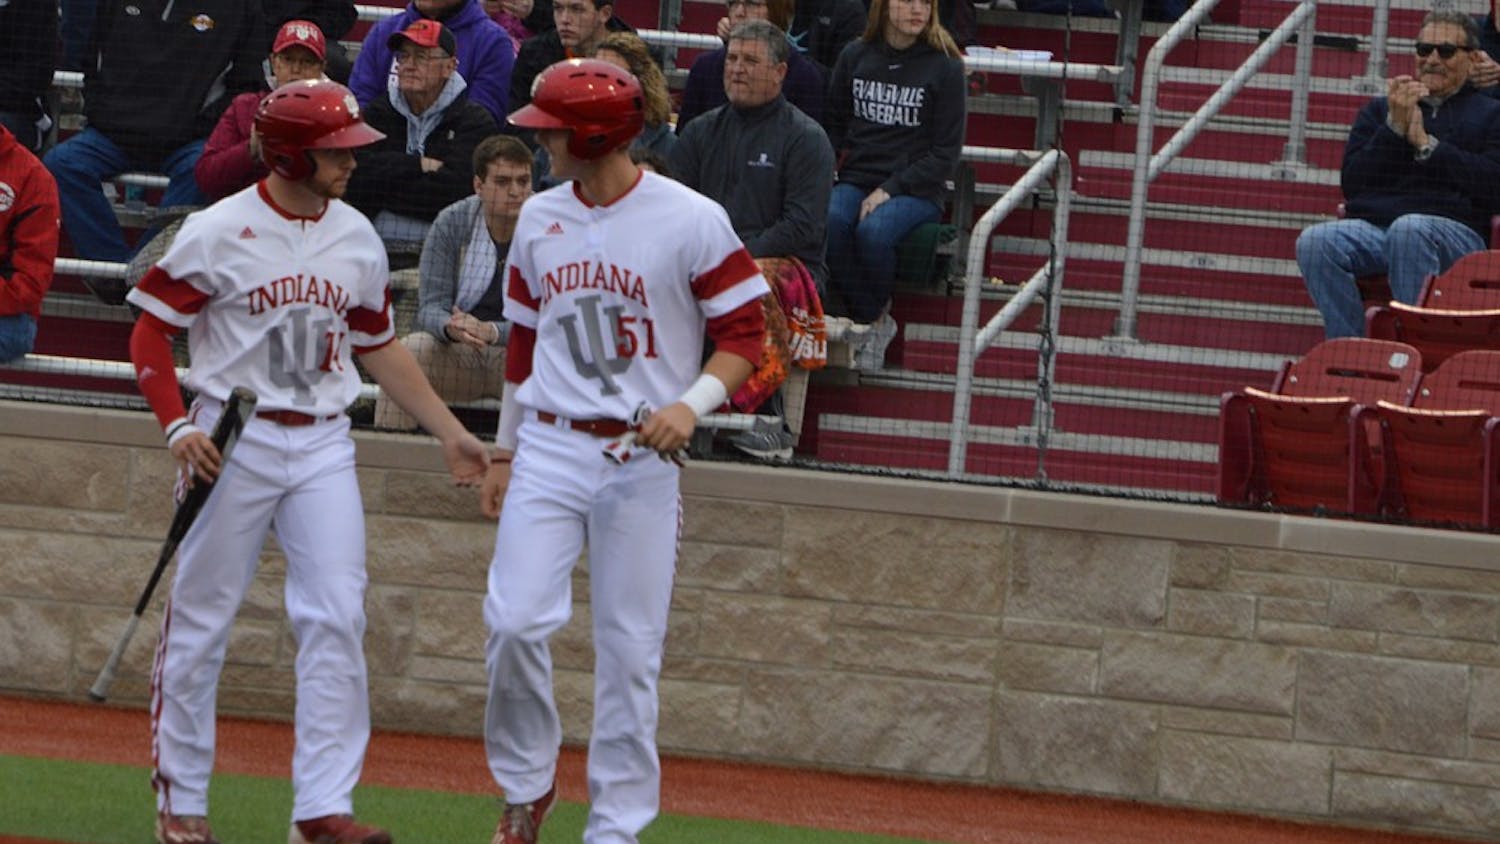 Sophomore Matt Lloyd and junior Logan Sowers congratulate each other after they both tagged home plate. They both hit singles, and&nbsp;senior Tony Butler hit a double to give the Hoosiers a 3-2 lead against the Evansville Aces.&nbsp;